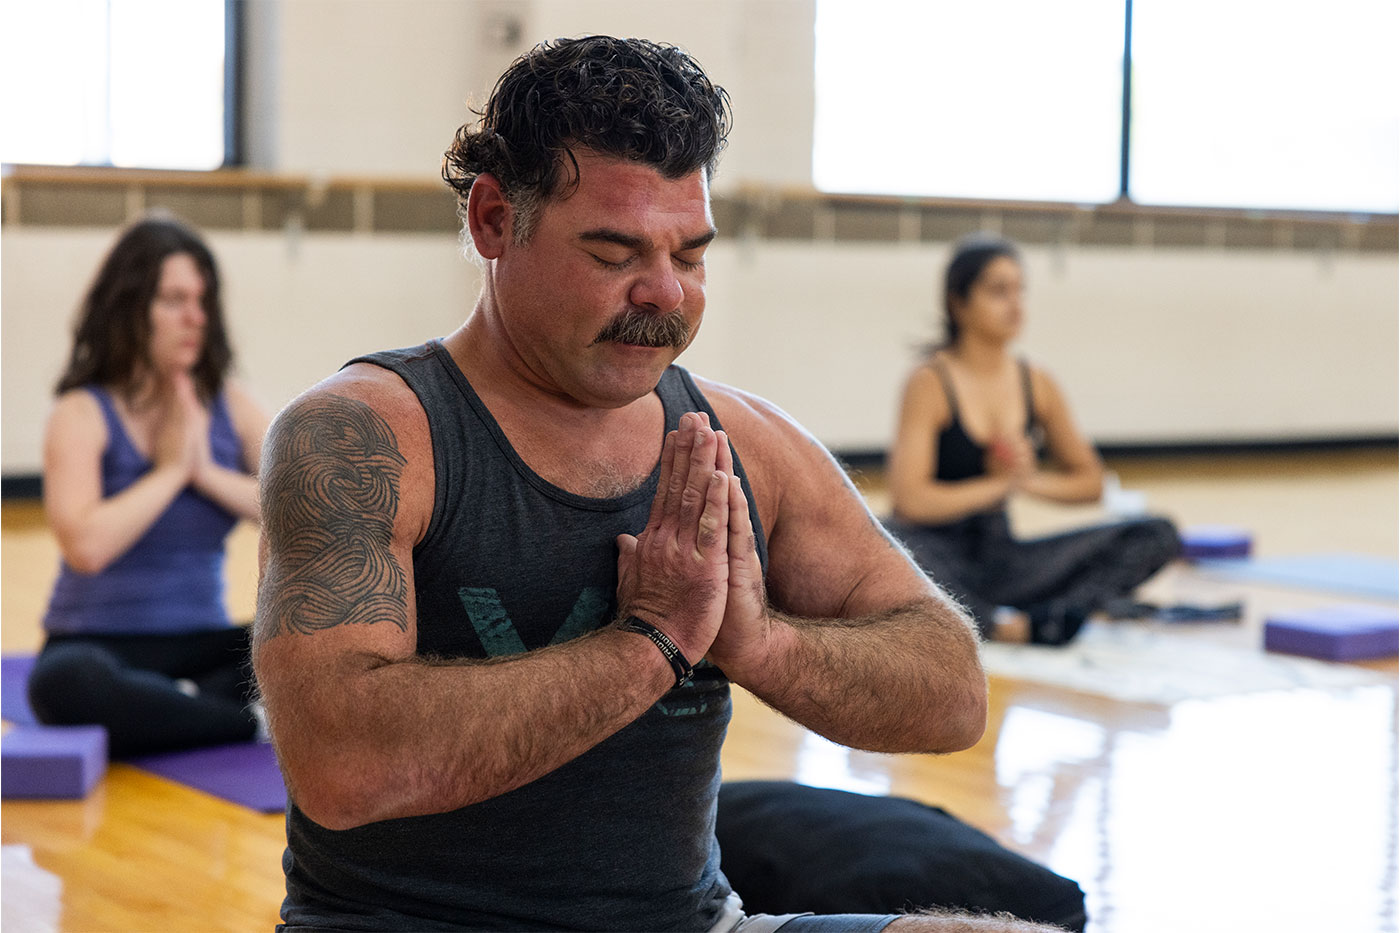 Jeff participating in yoga classes. 